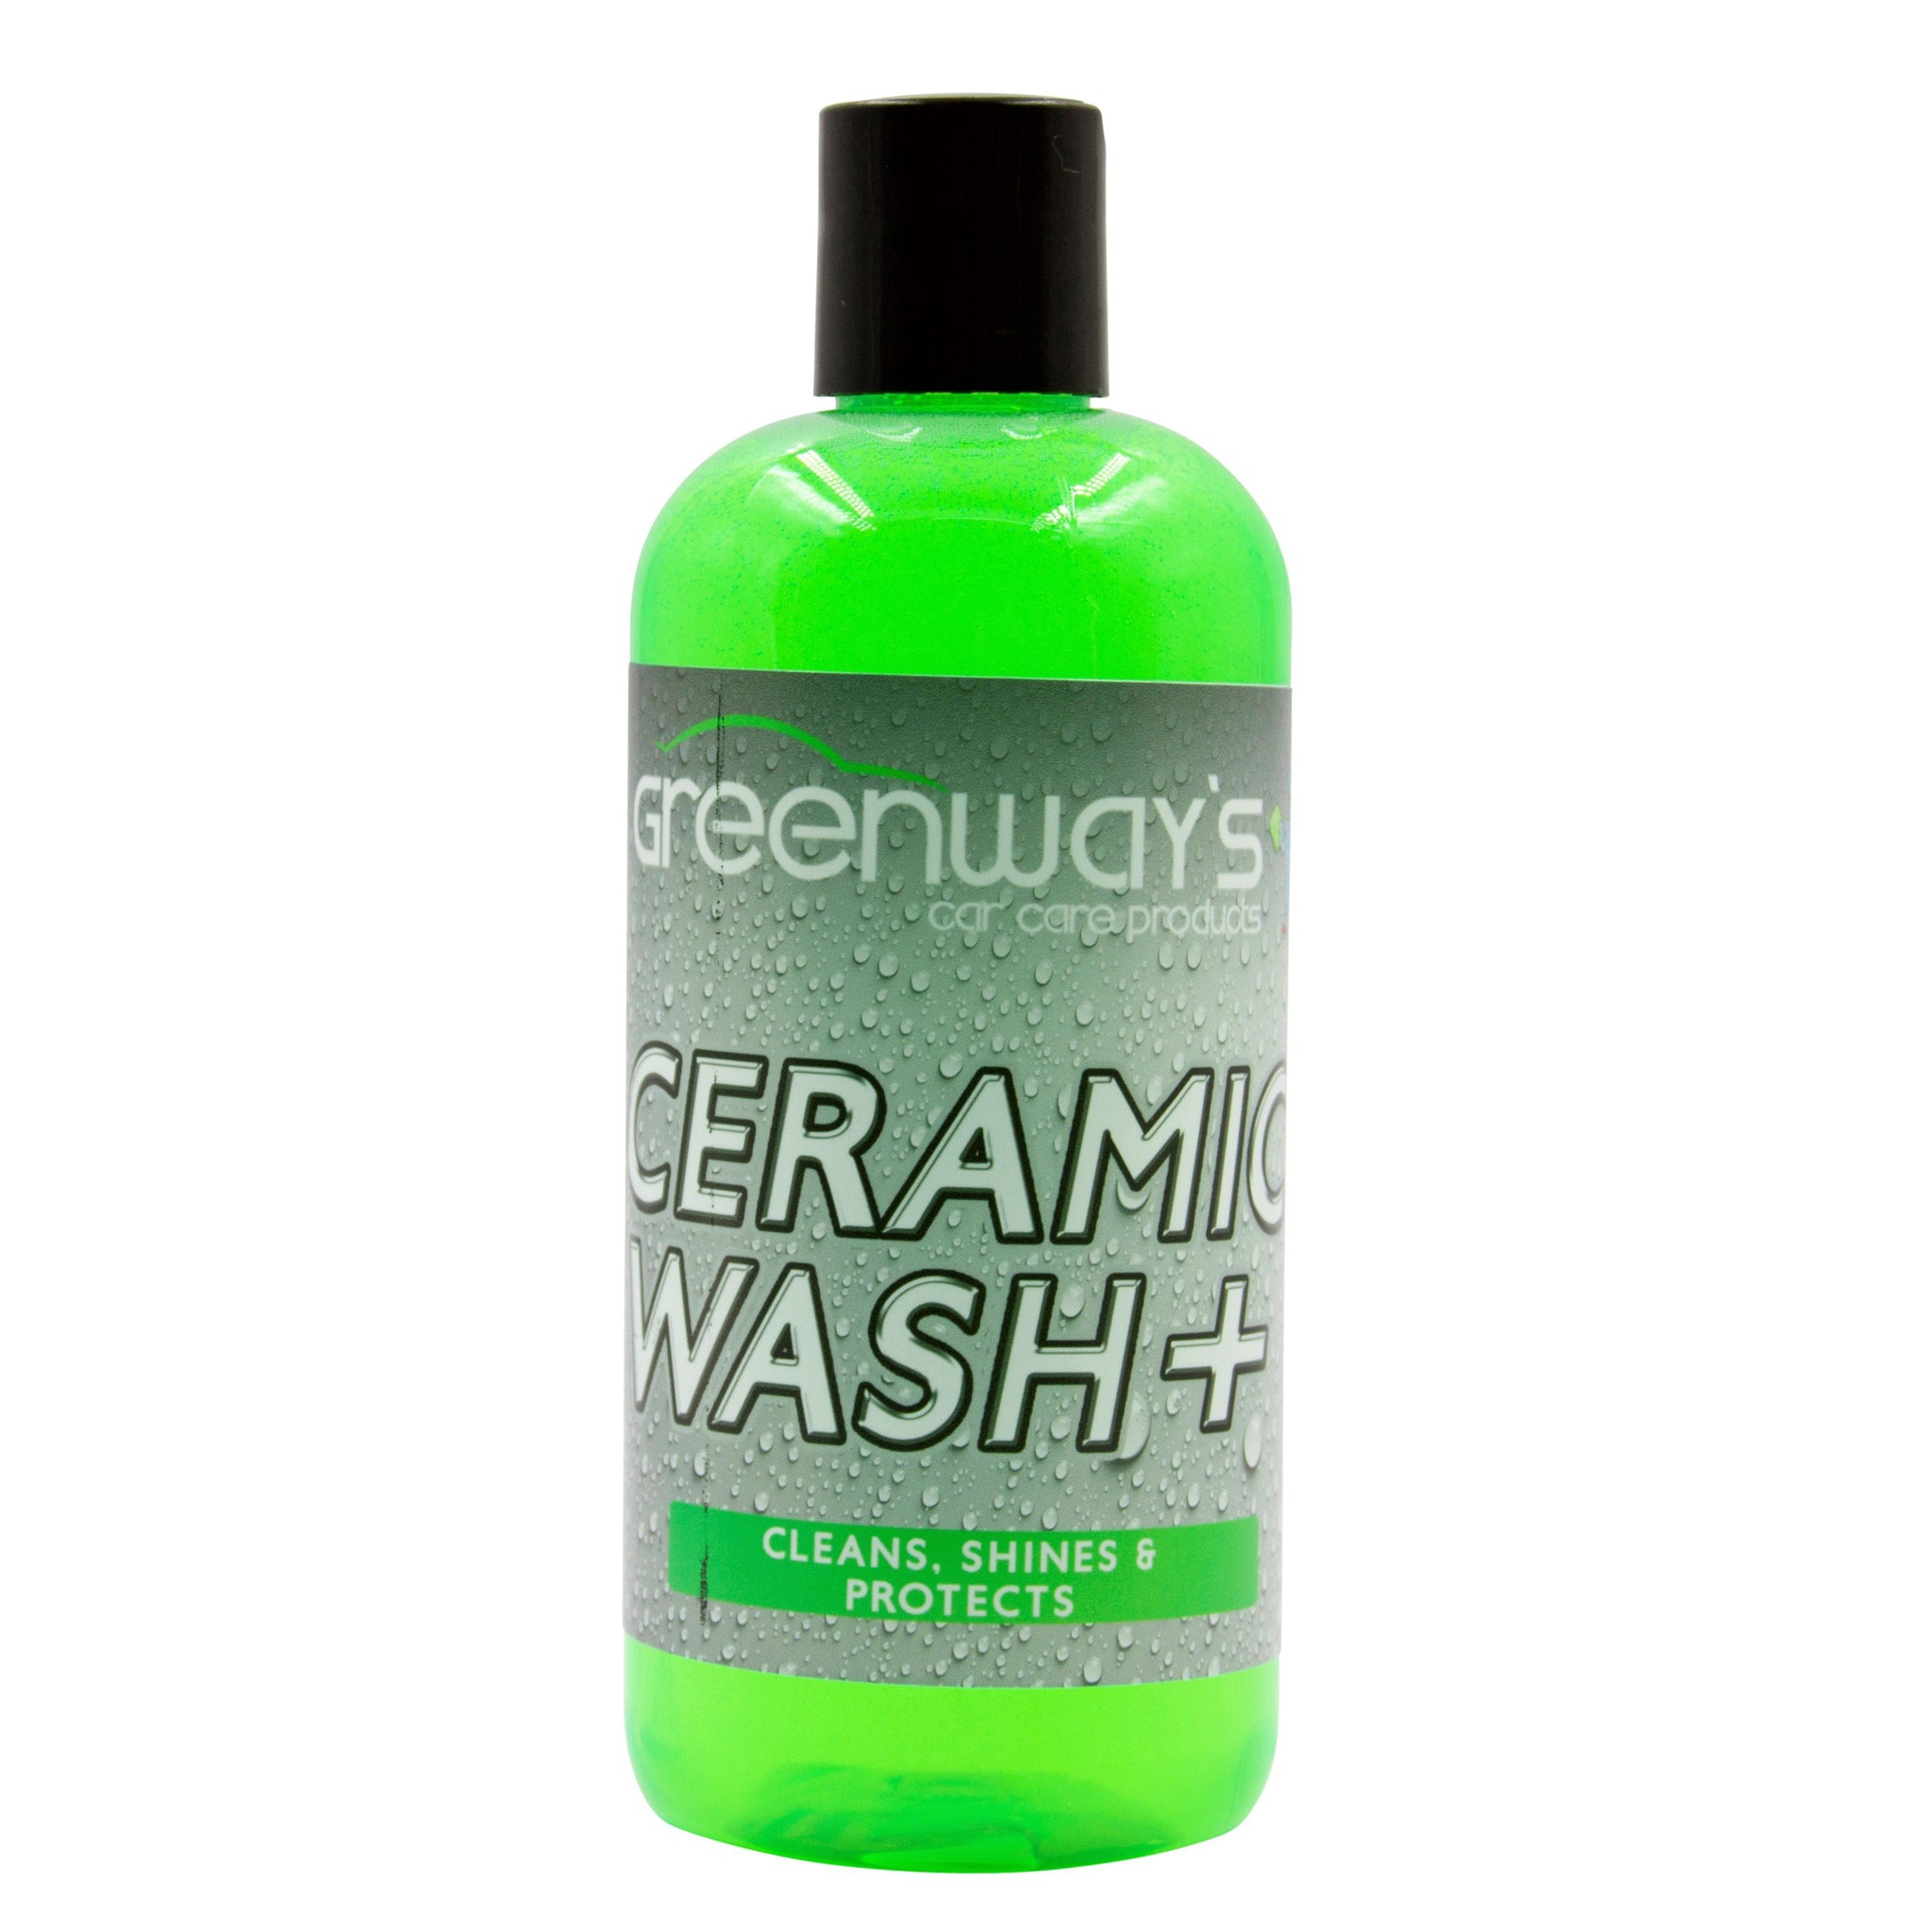  Greenway’s Ceramic Wash +, Si02 ceramic infused highly concentrated car soap with extreme foam and custom scent,16 ounces.